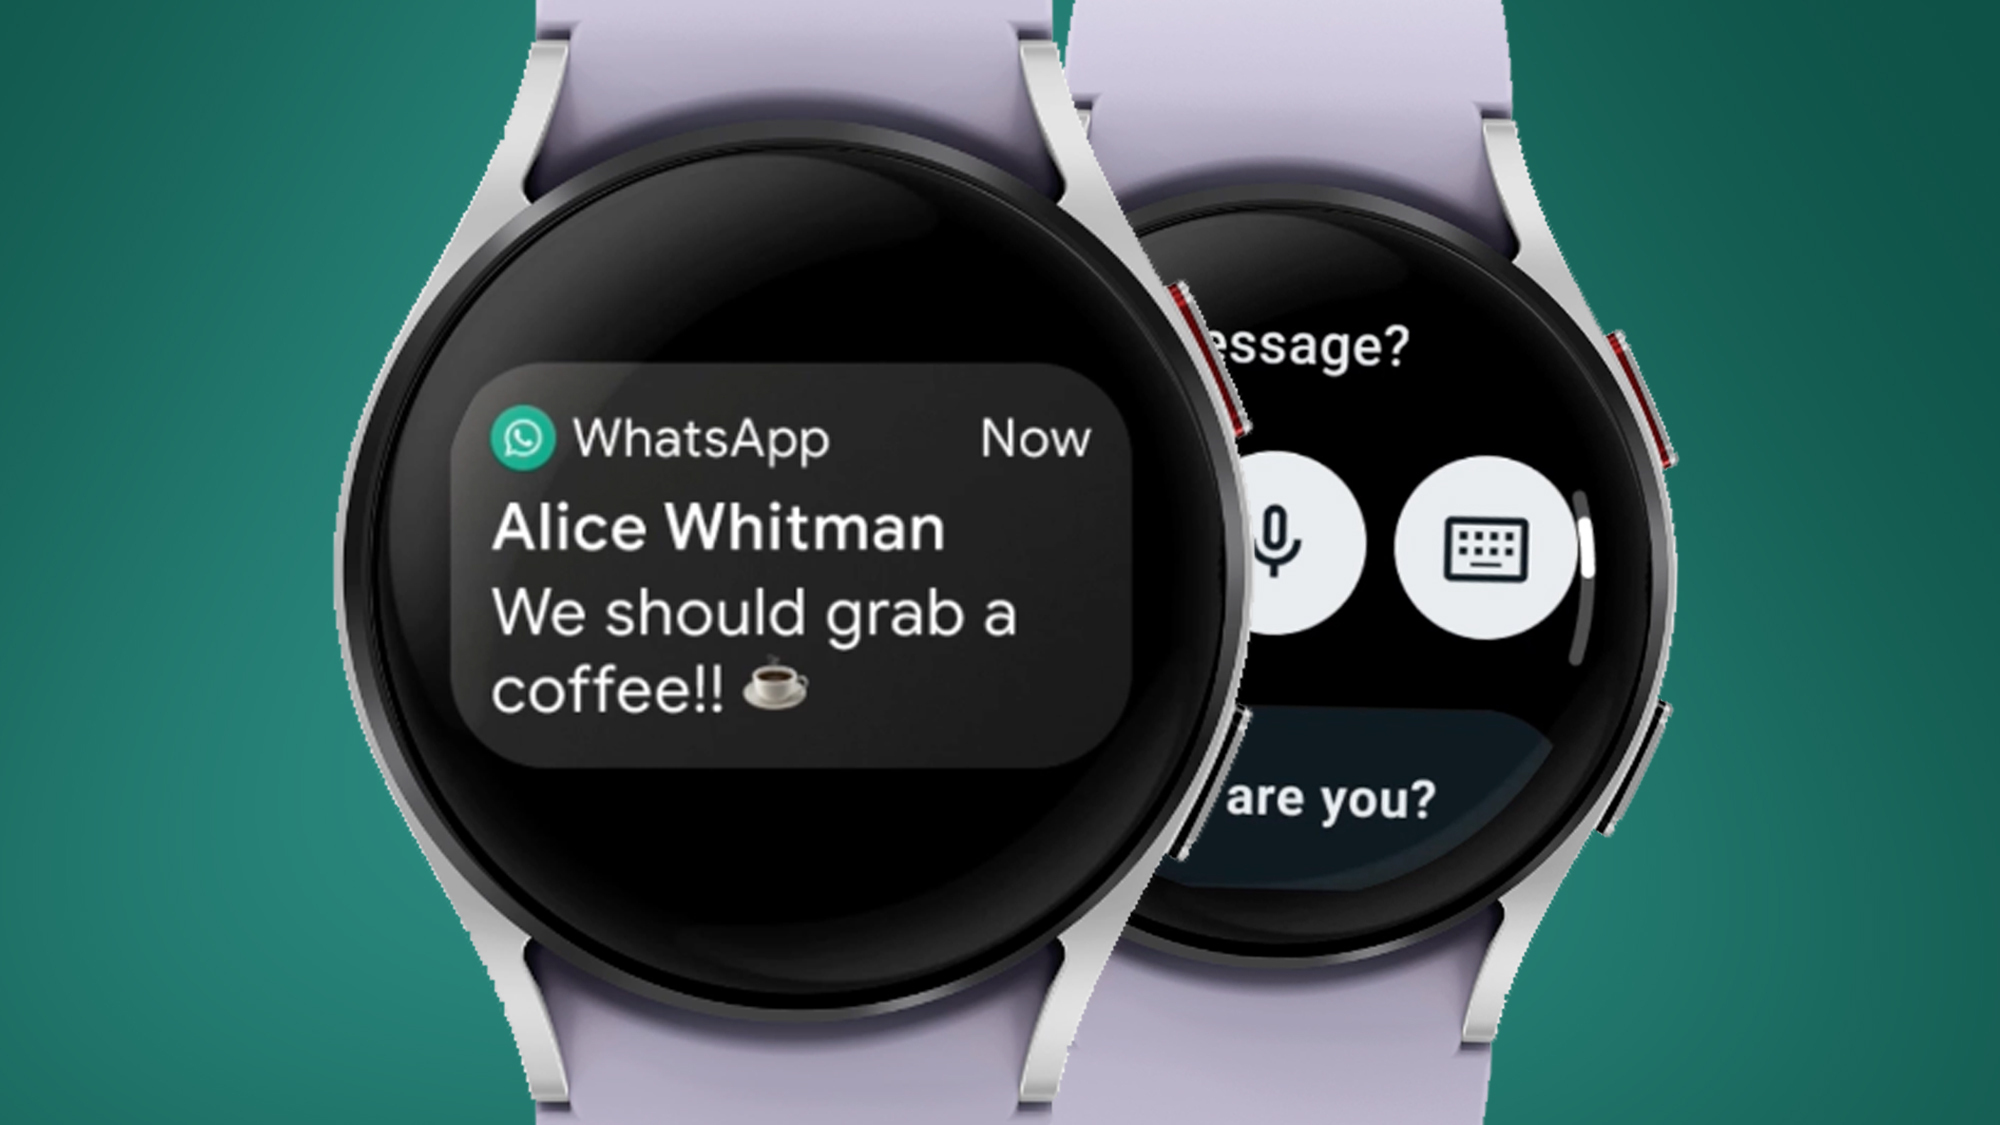 WhatsApp launches on WearOS helping you stay connected without a smartphone